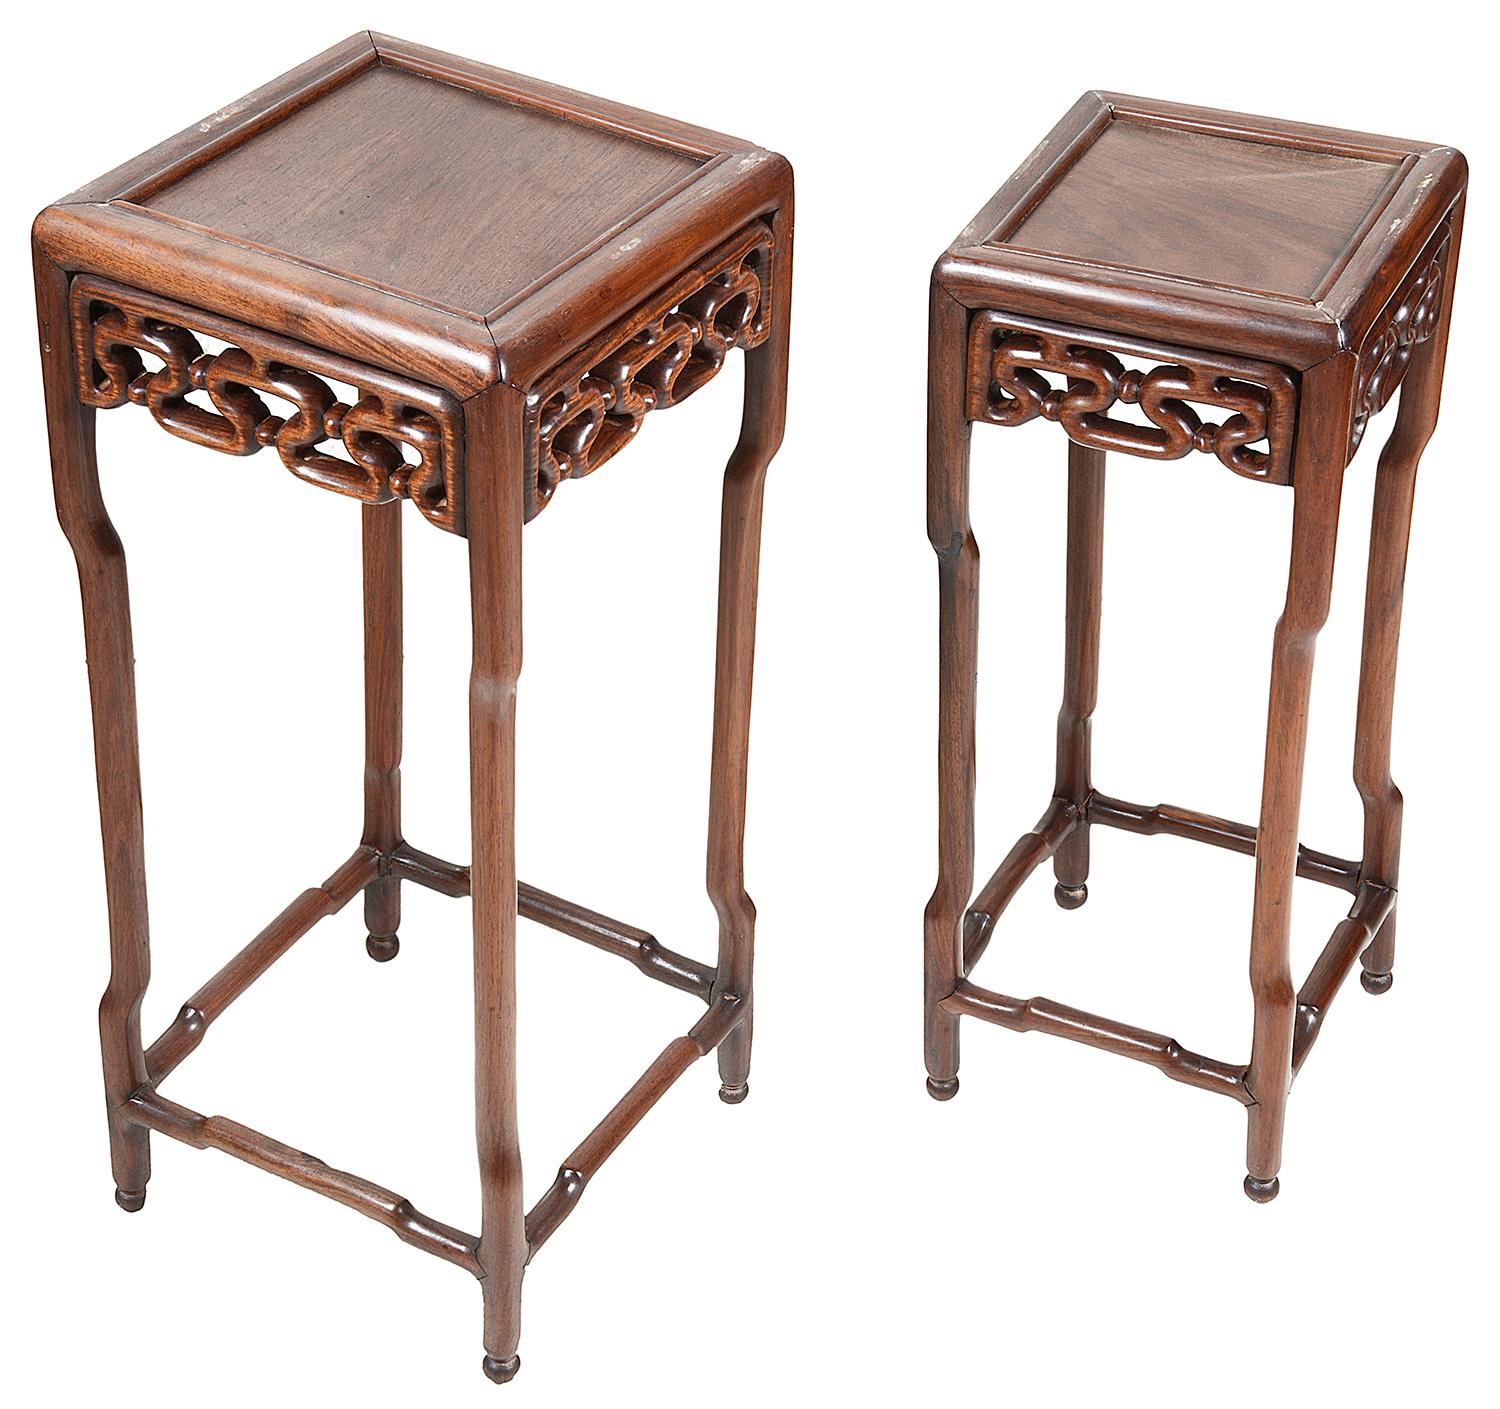 Nest of Four Chinese Hardwood Tables, Late 19th Century For Sale 1